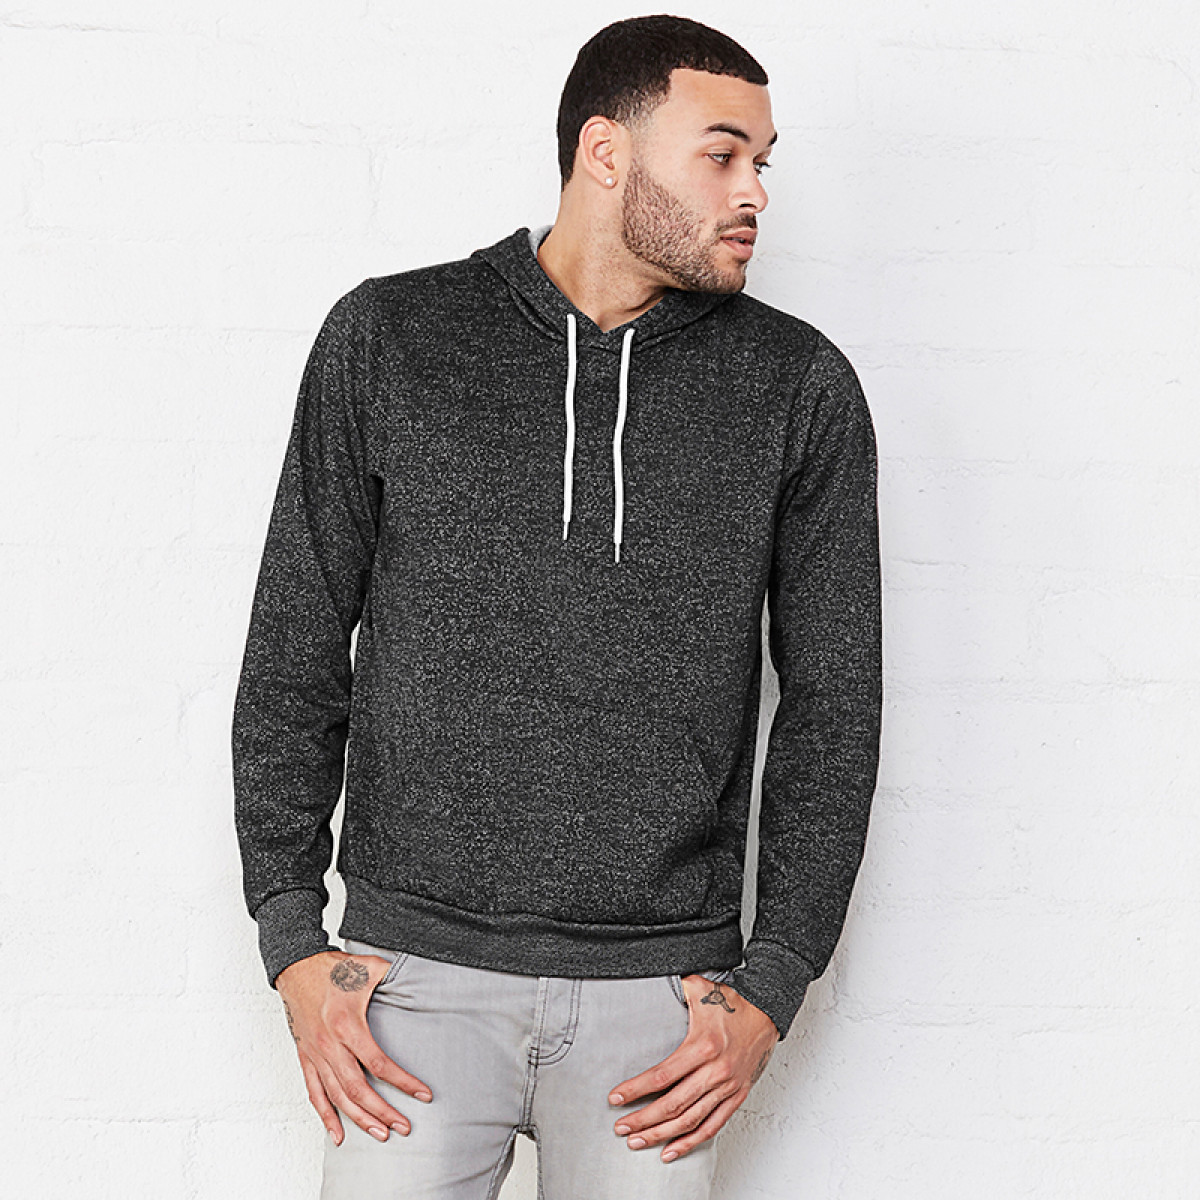 Unisex Polycotton Hoodie with white string cord